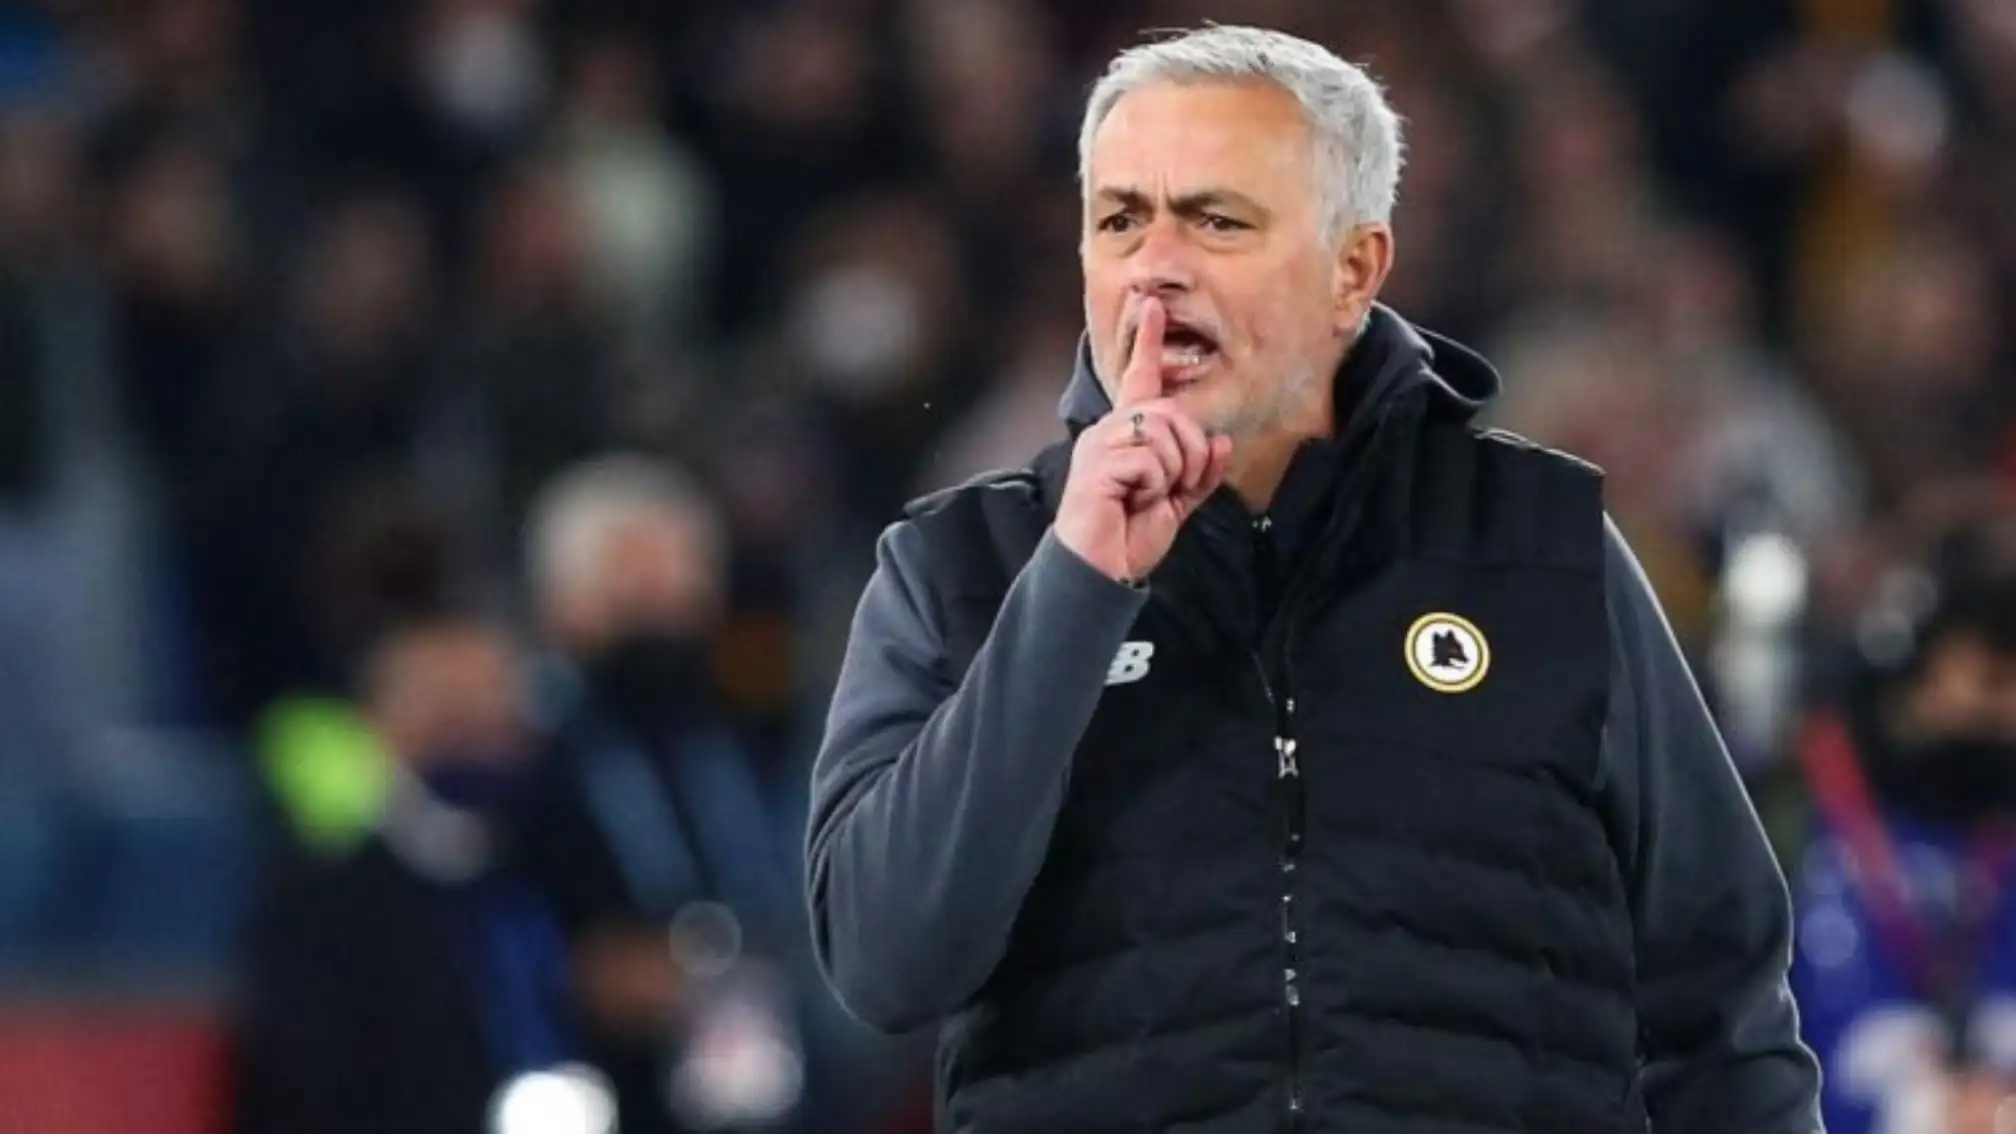 Jose Mourinho pledges loyalty to Roma after Conference League win